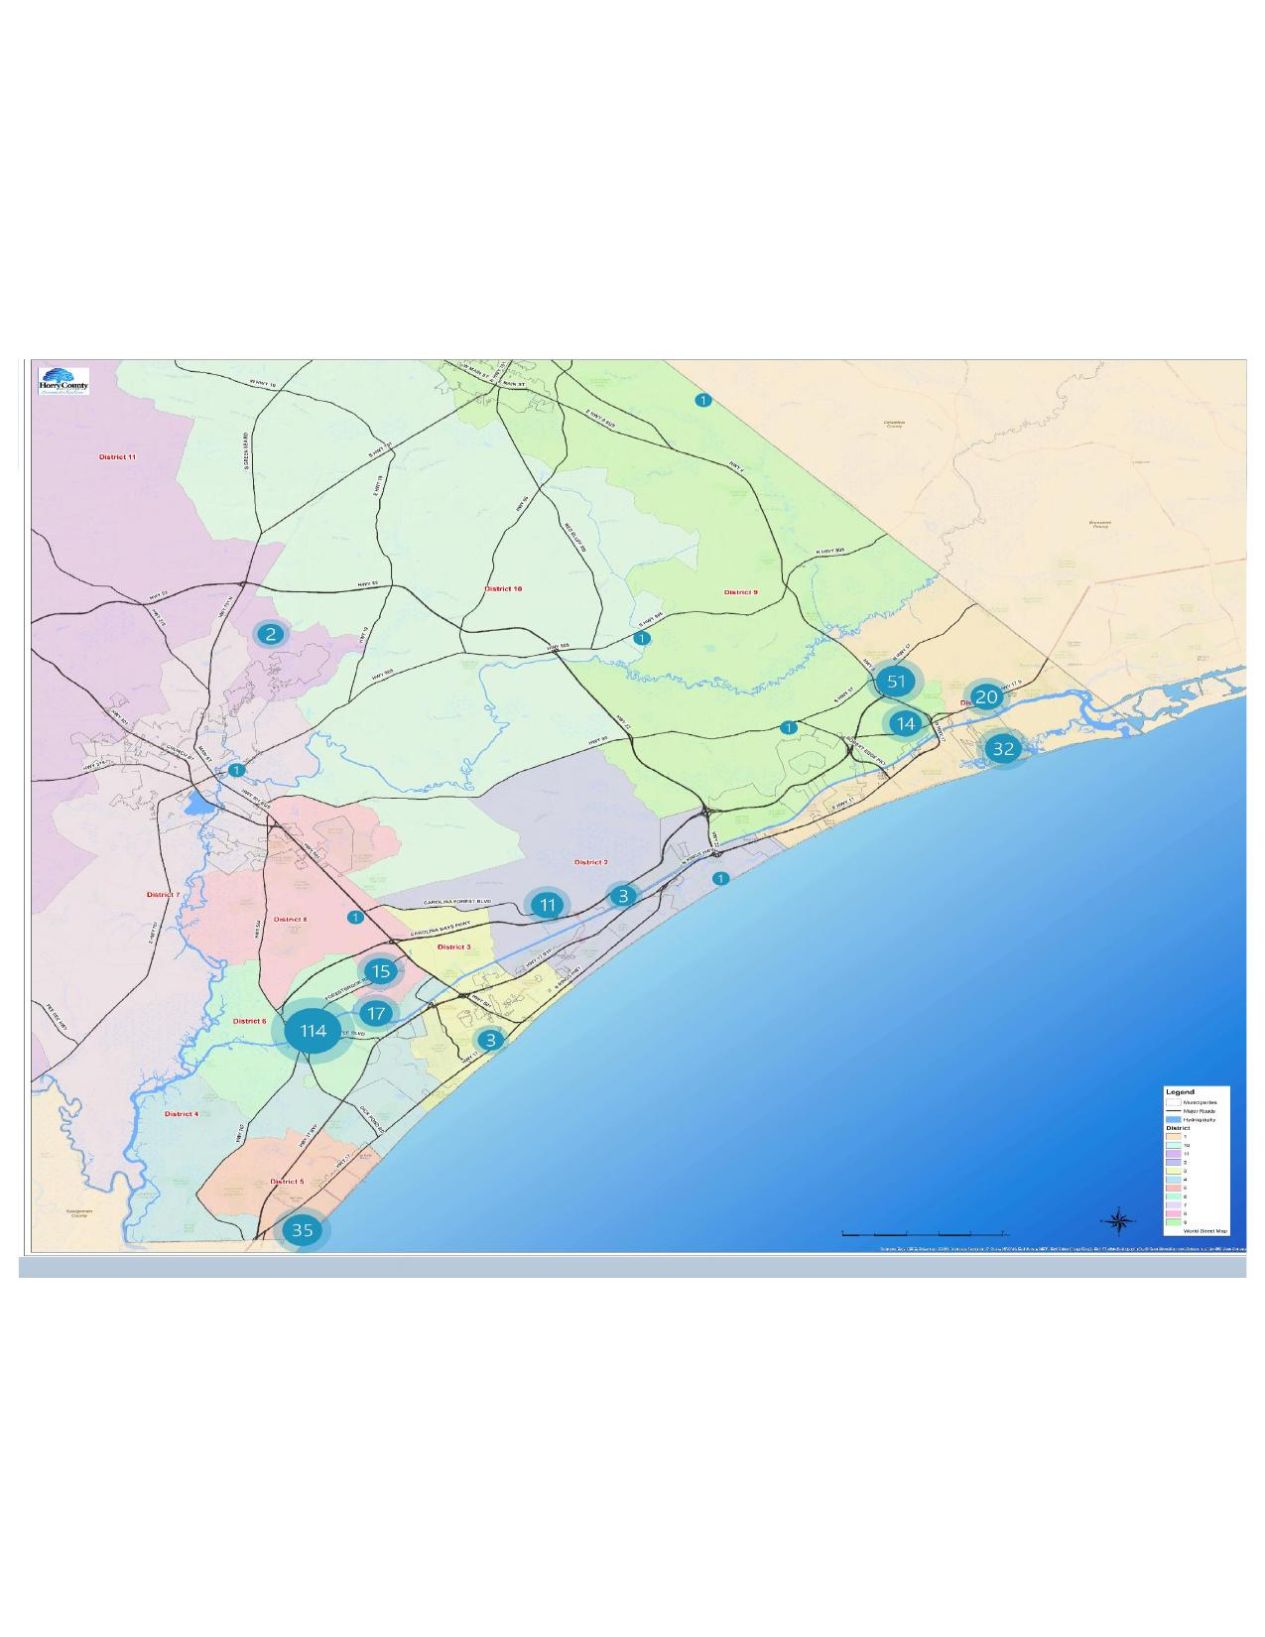 horry county flood map